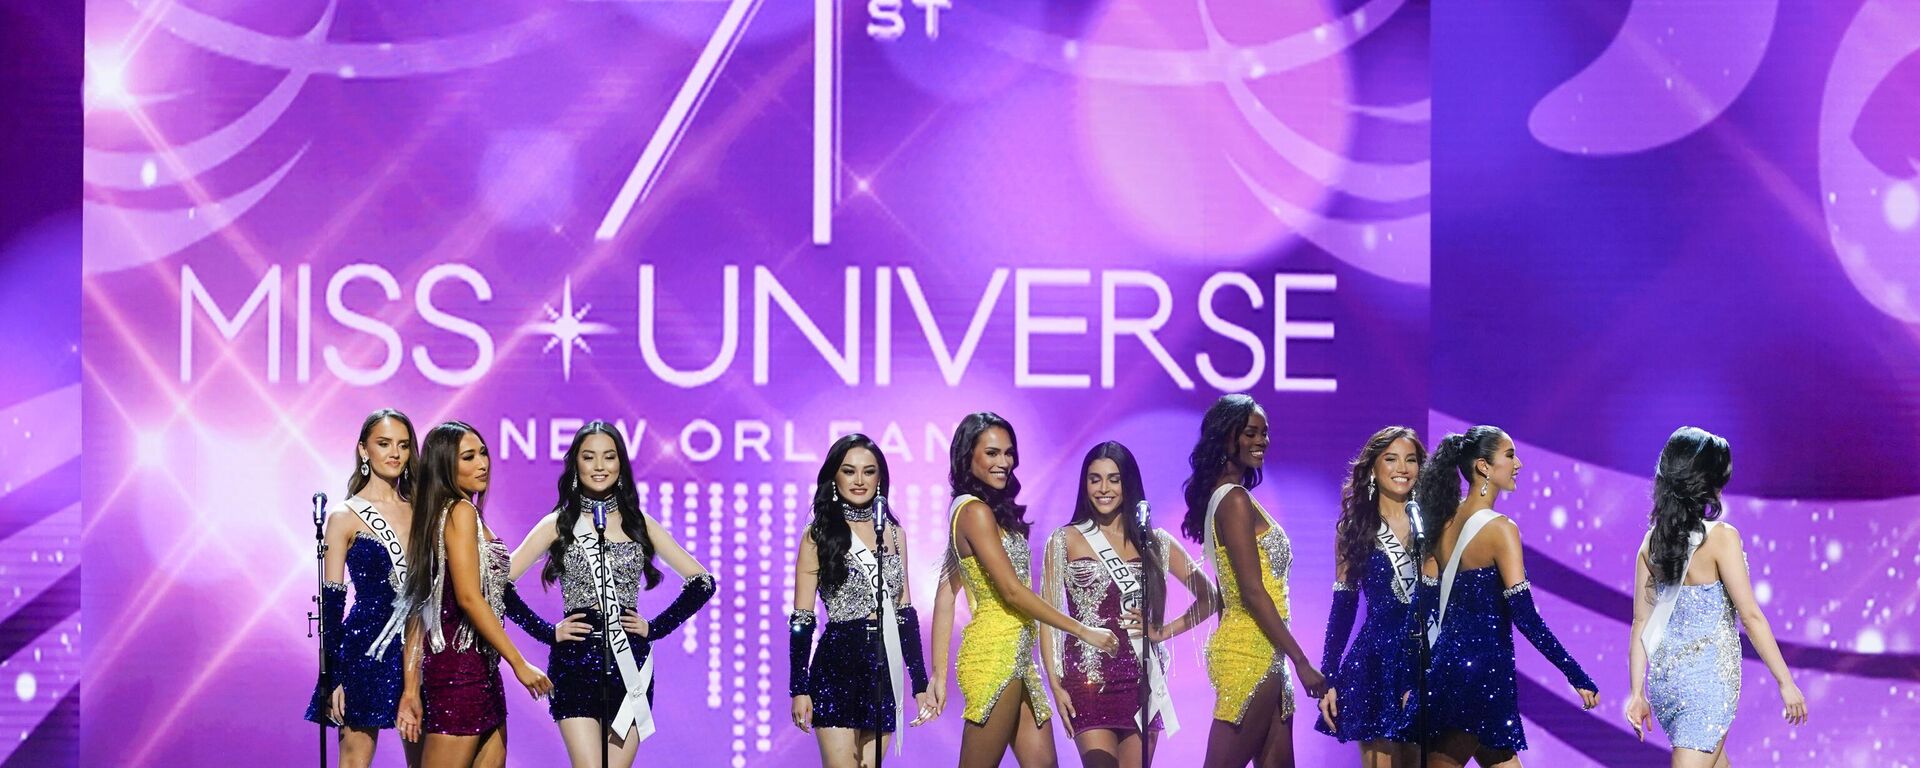 Contestants are introduced at the start of the preliminary round of the 71st Miss Universe Beauty Pageant in New Orleans, Wednesday, Jan. 11, 2023. - Sputnik International, 1920, 14.01.2023